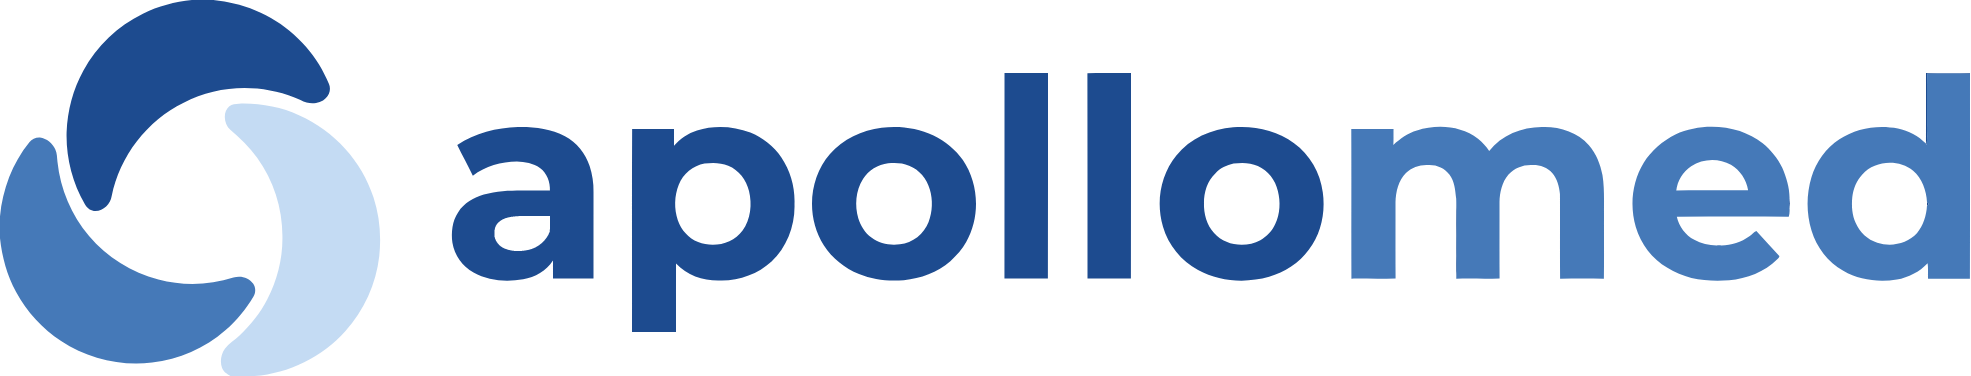 Apollo Medical Holdings logo large (transparent PNG)